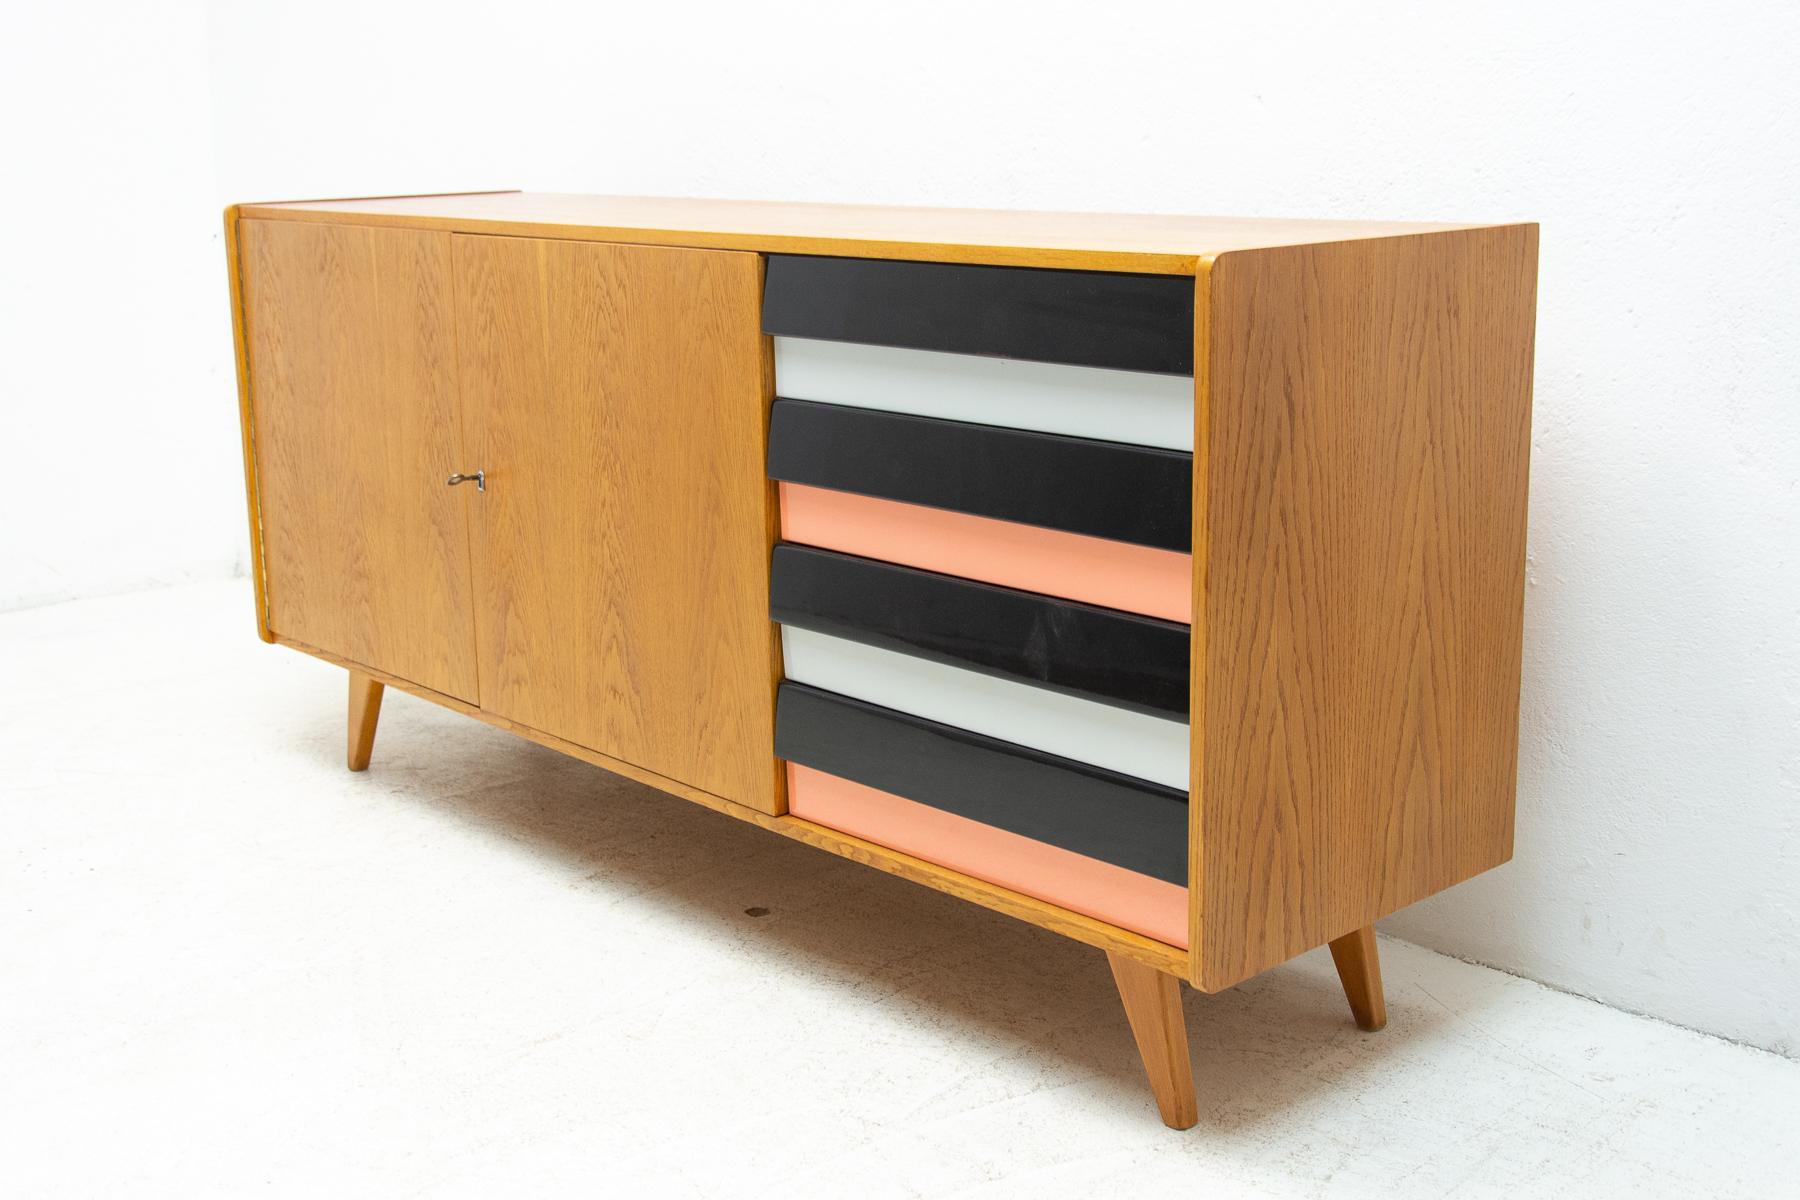 A popular vintage sideboard model U-460 from the 1960´s. It was designed by Jiri Jiroutek for Interier Praha. It features a beechwood, plywood, colored lacquered drawers. In very good condition, fully renovated.

Measures : Height: 77 cm, lenght: